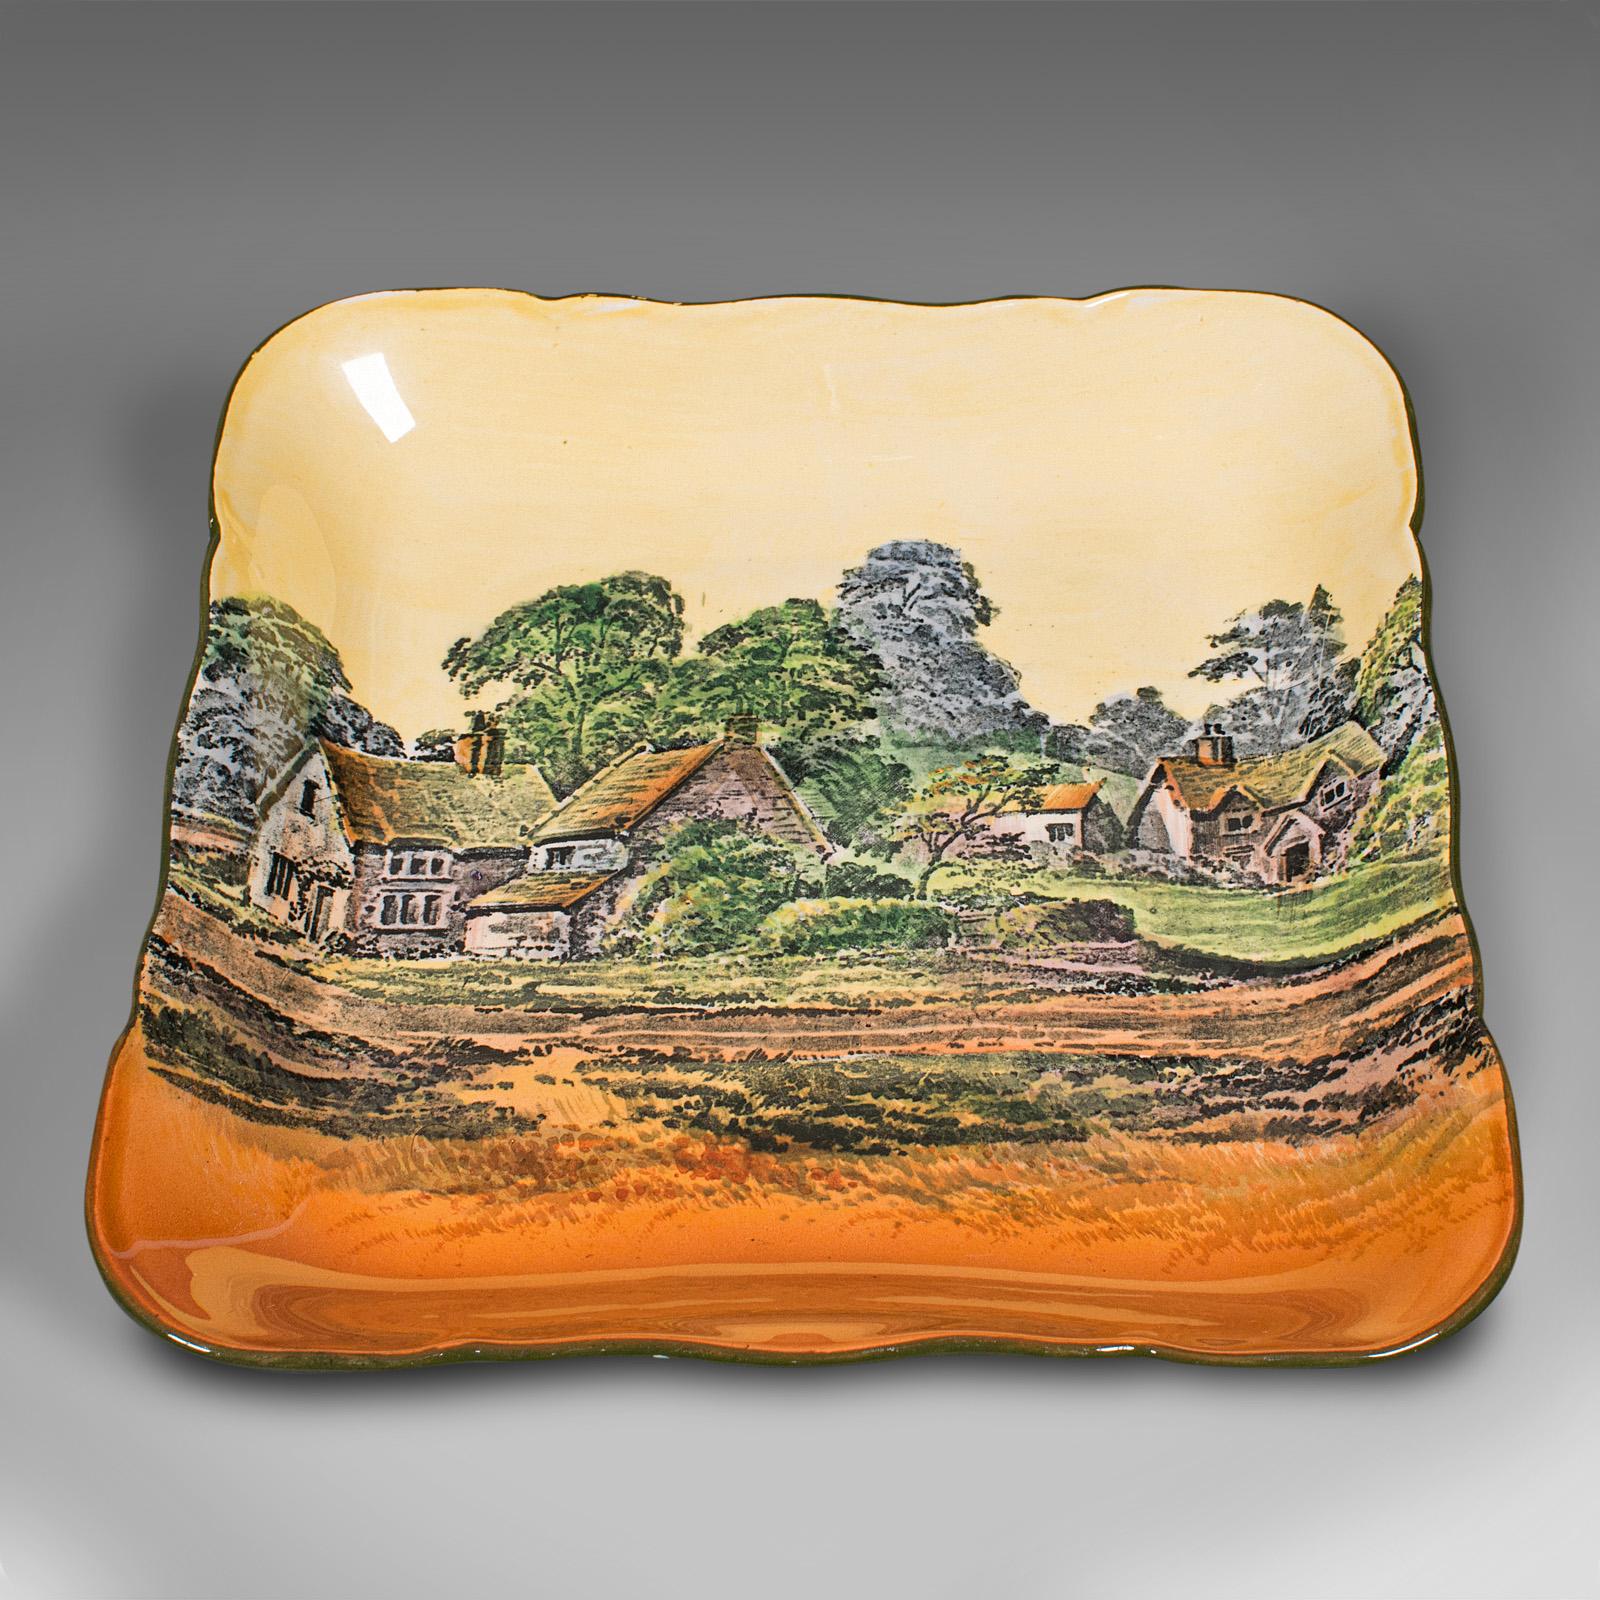 This is a vintage decorative square dish. An English, ceramic serving plate, dating to the early 20th century, circa 1930.

Decorated with traditional English country side appeal
Displaying a desirable aged patina in good original order
Painted